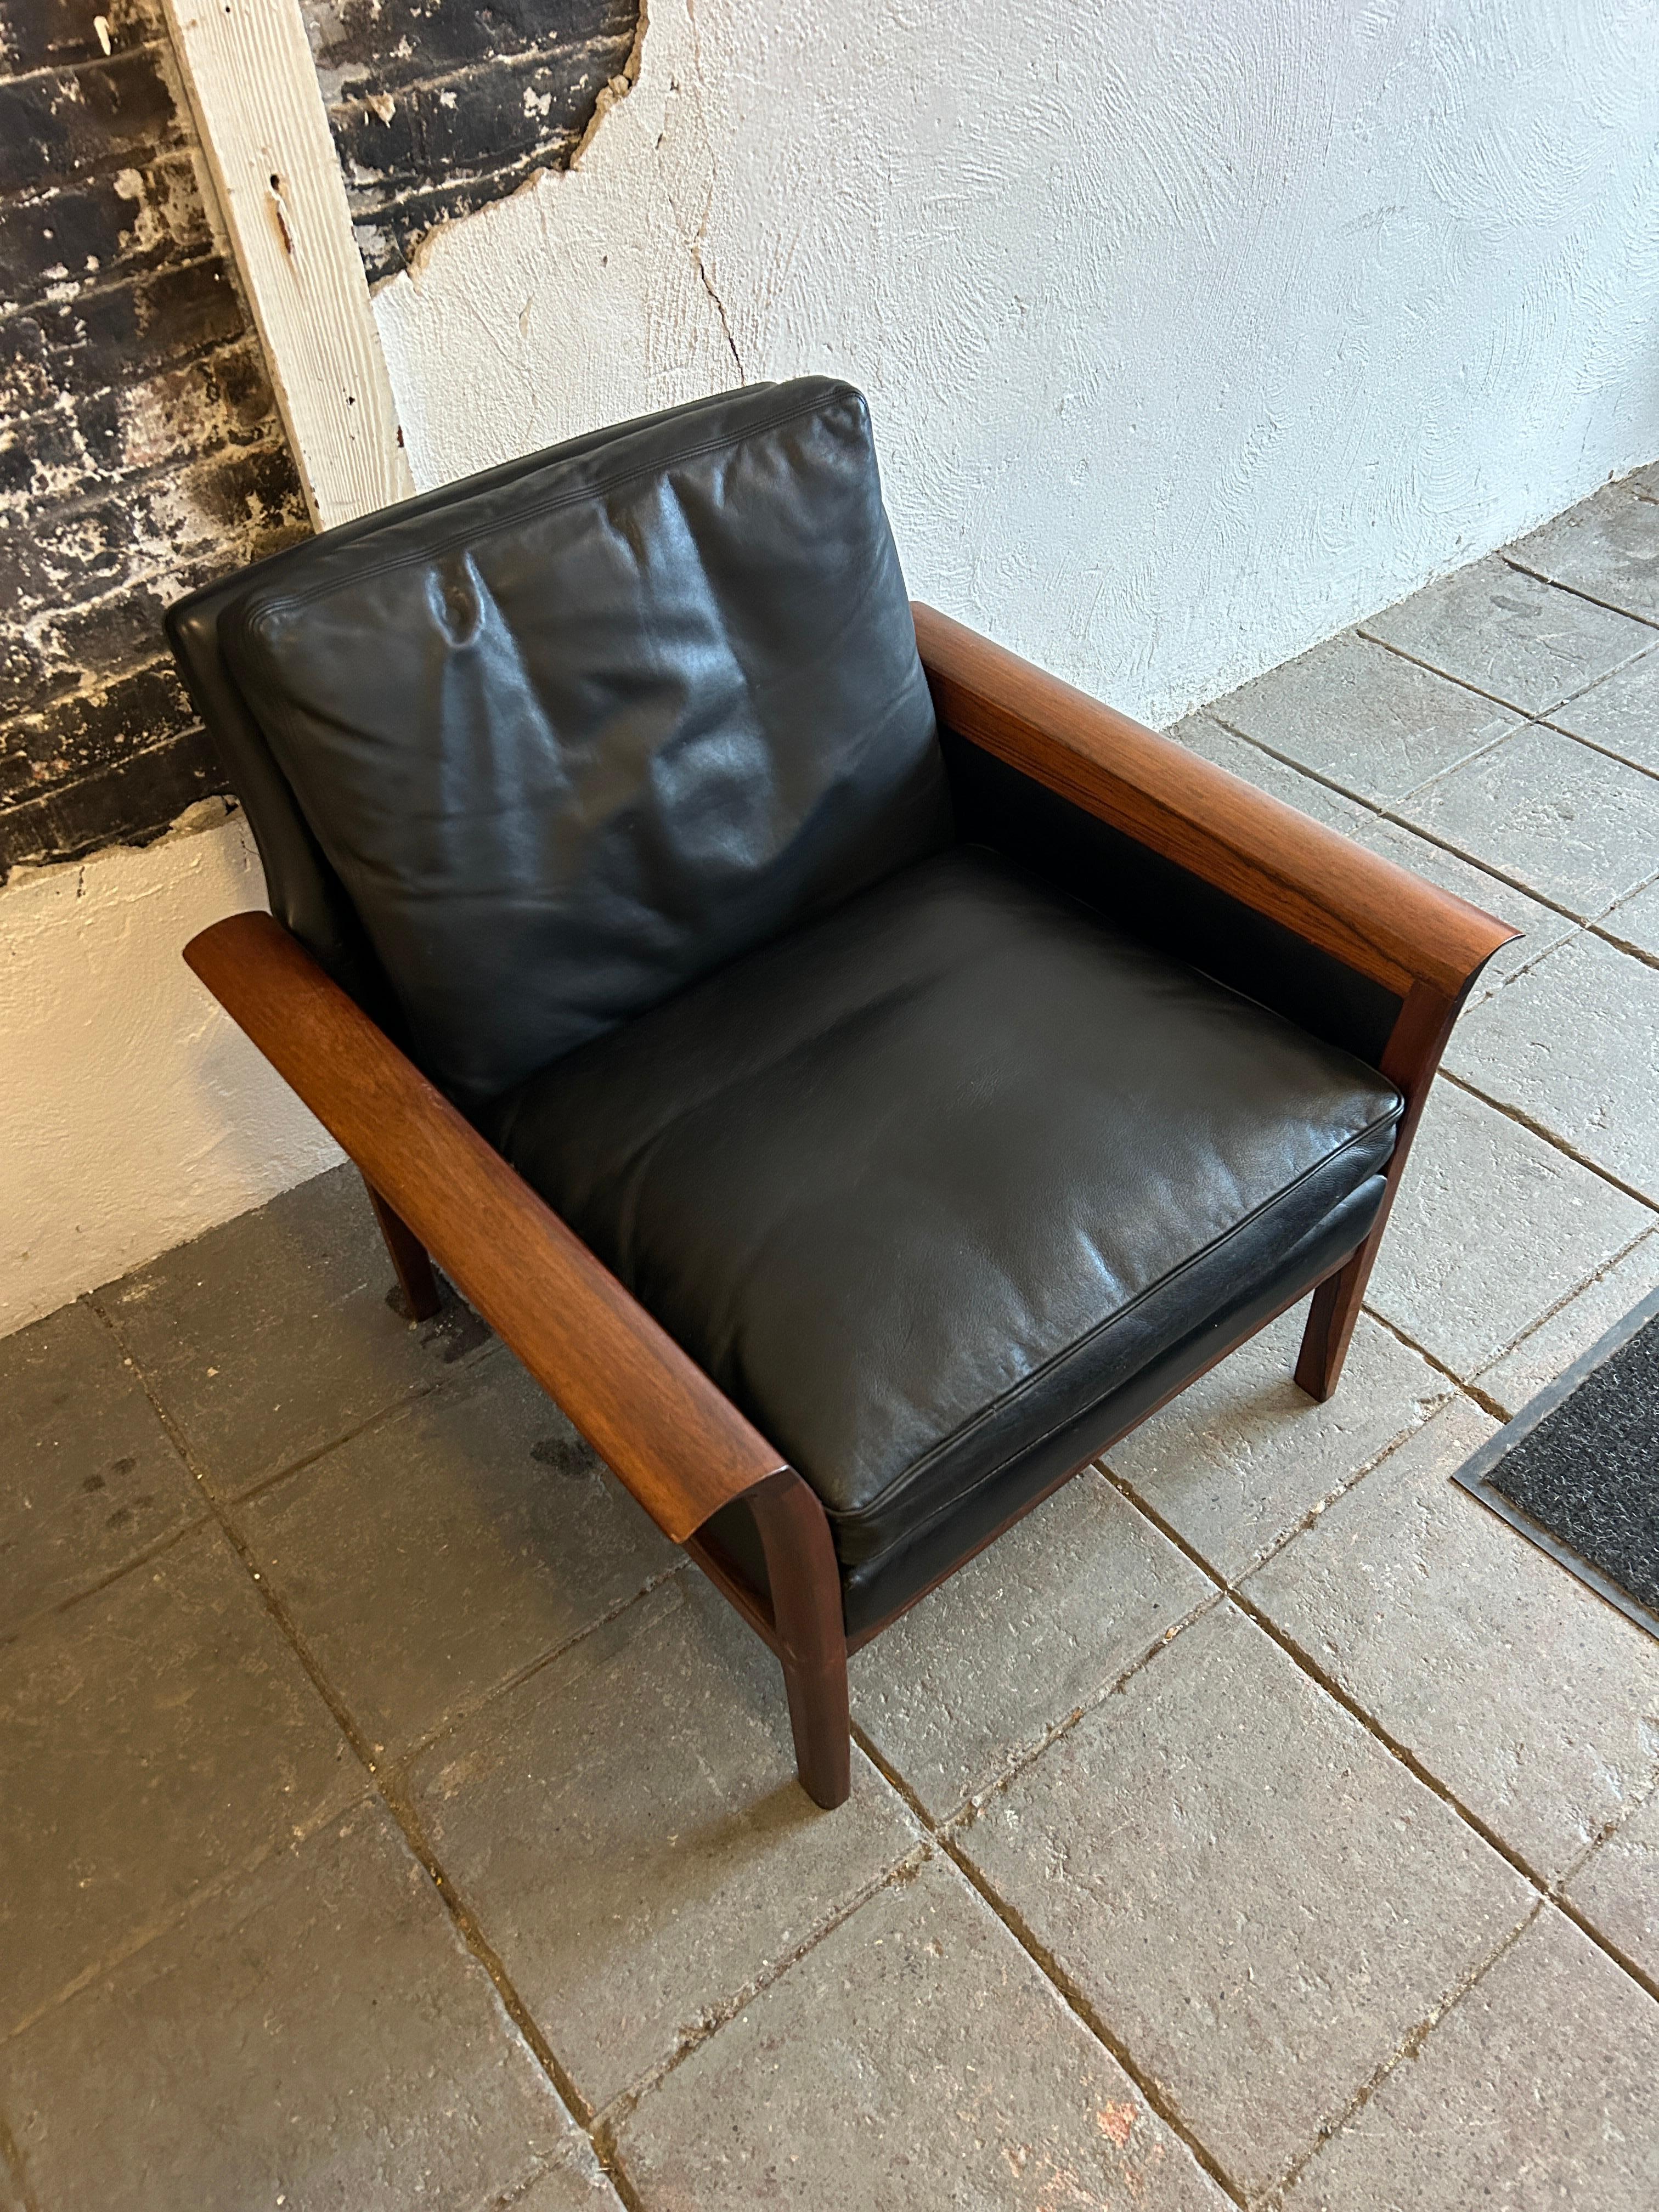 Beautiful Knut Saeter for Vatne Mobler black leather and rosewood lounge chair. All original black leather upholstery worn in nicely. Stunning rosewood curved arms and legs. Very solid Black Leather chair. Labeled - Vatne Mobler. Made in Norway.